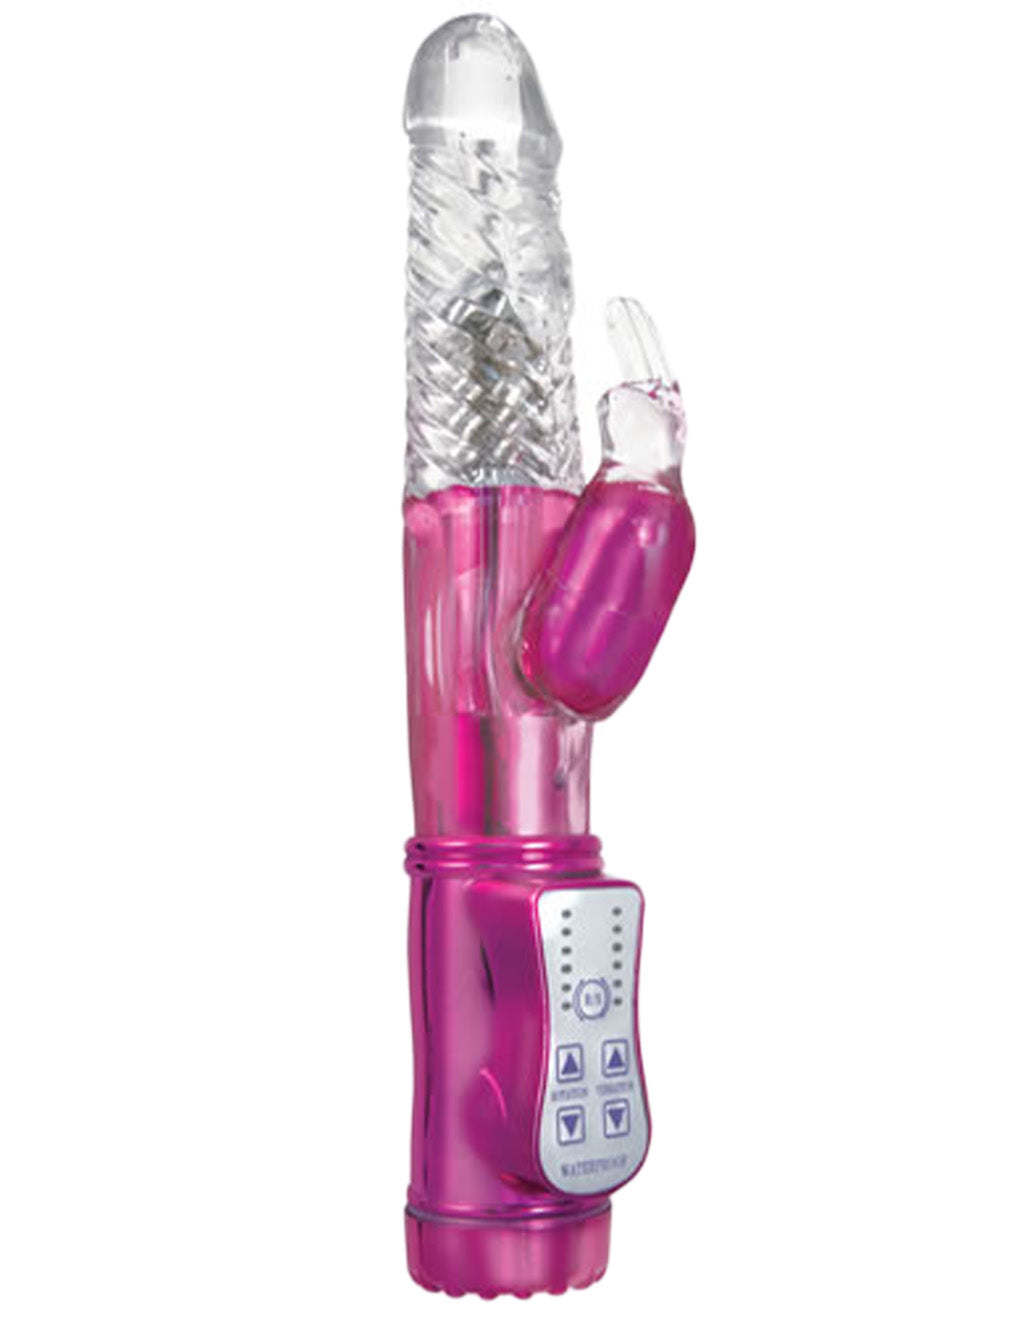 Energize Her Bunny 3 Vibrator- Pink- Front